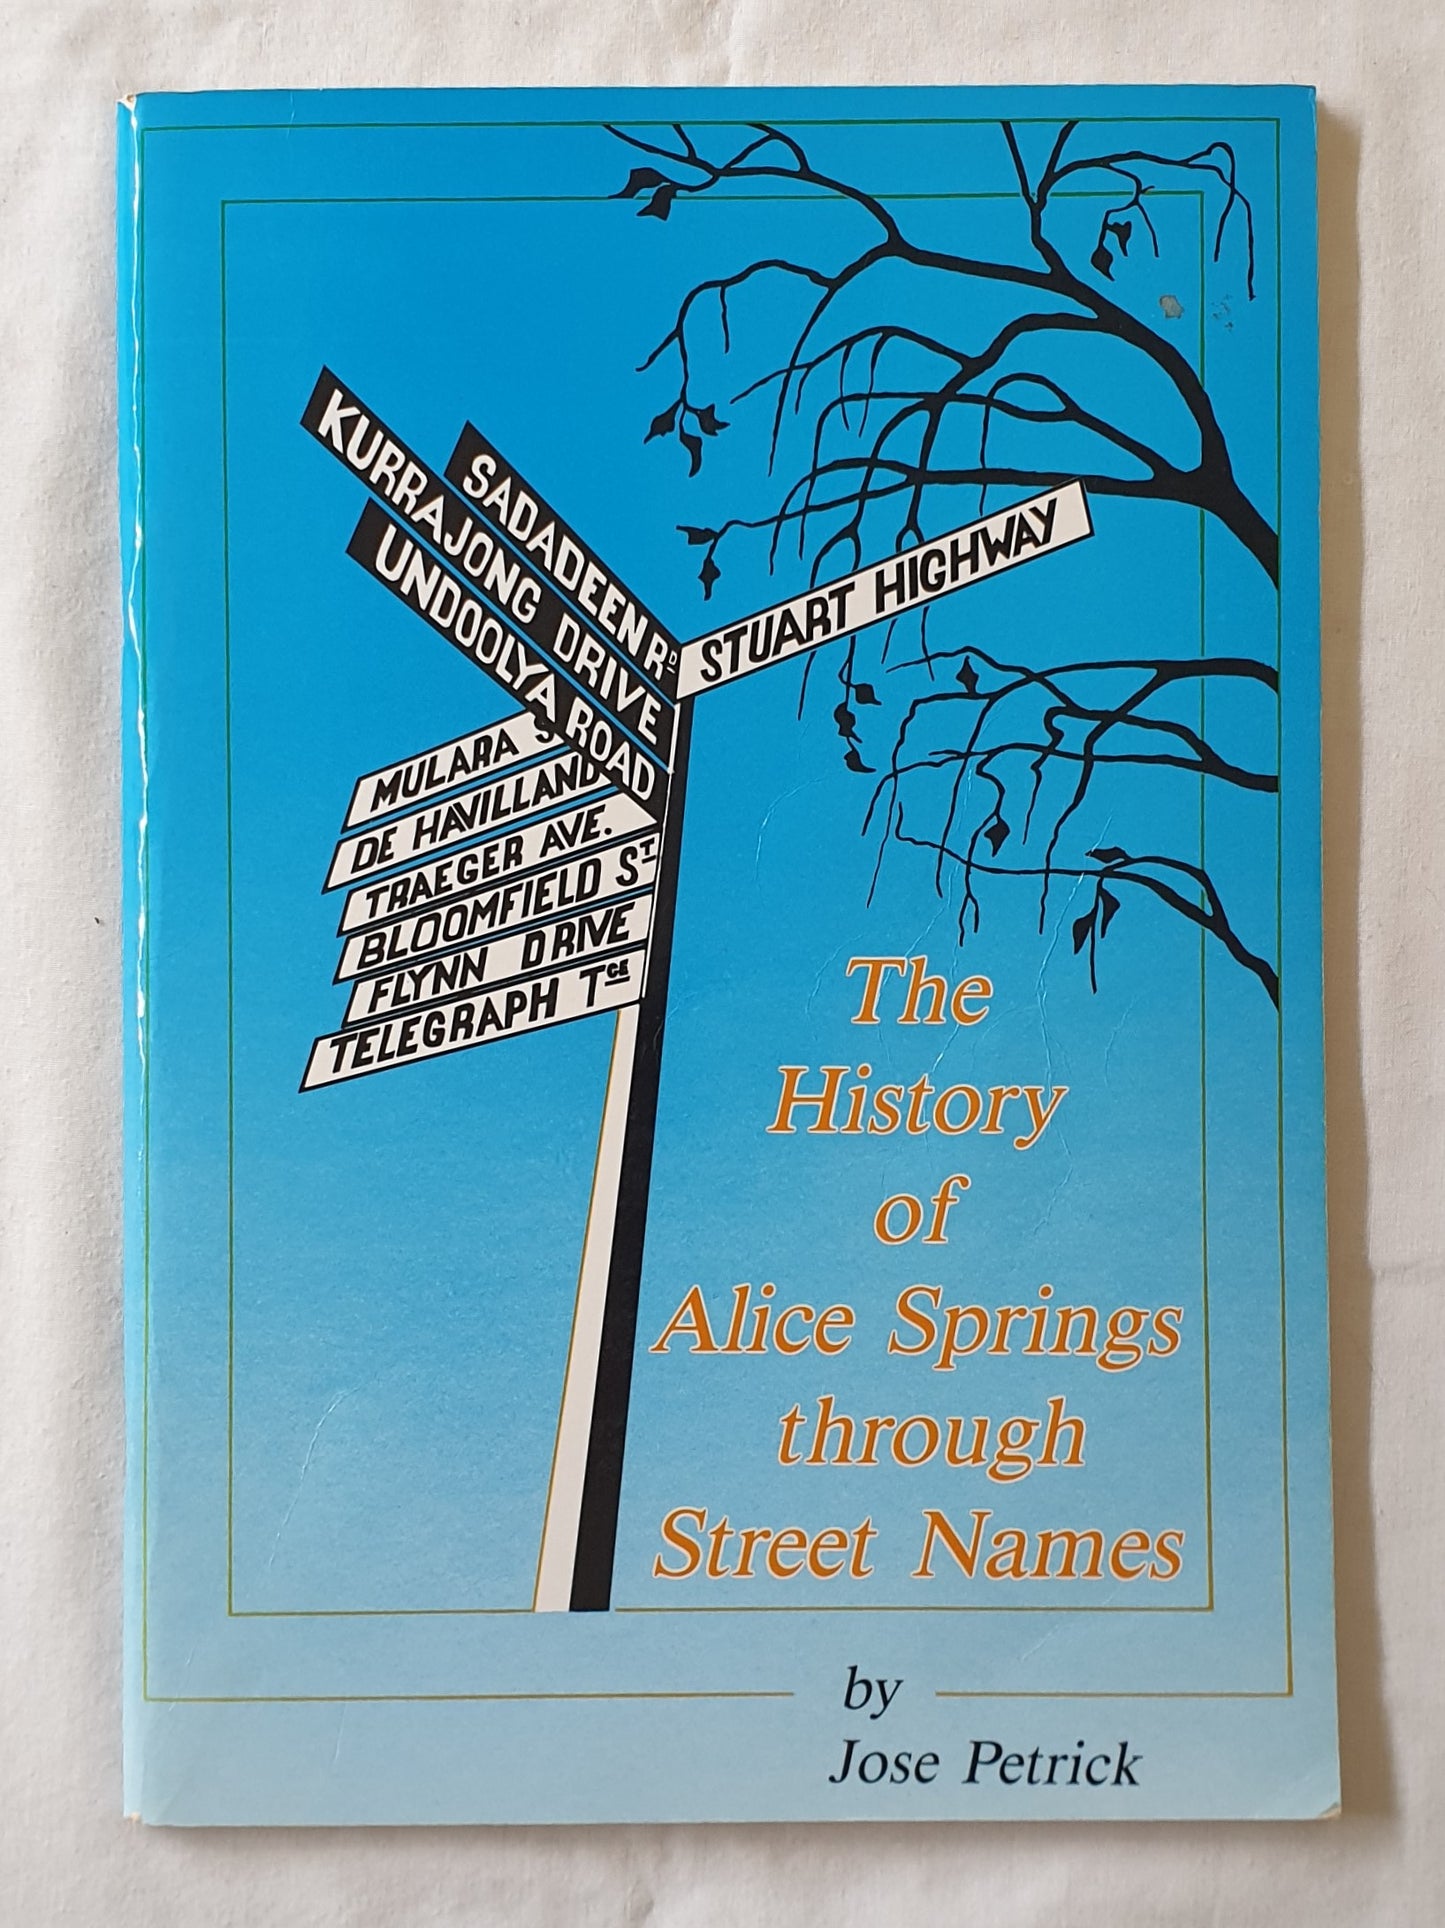 The History of Alice Springs through Street Names by Jose Petrick